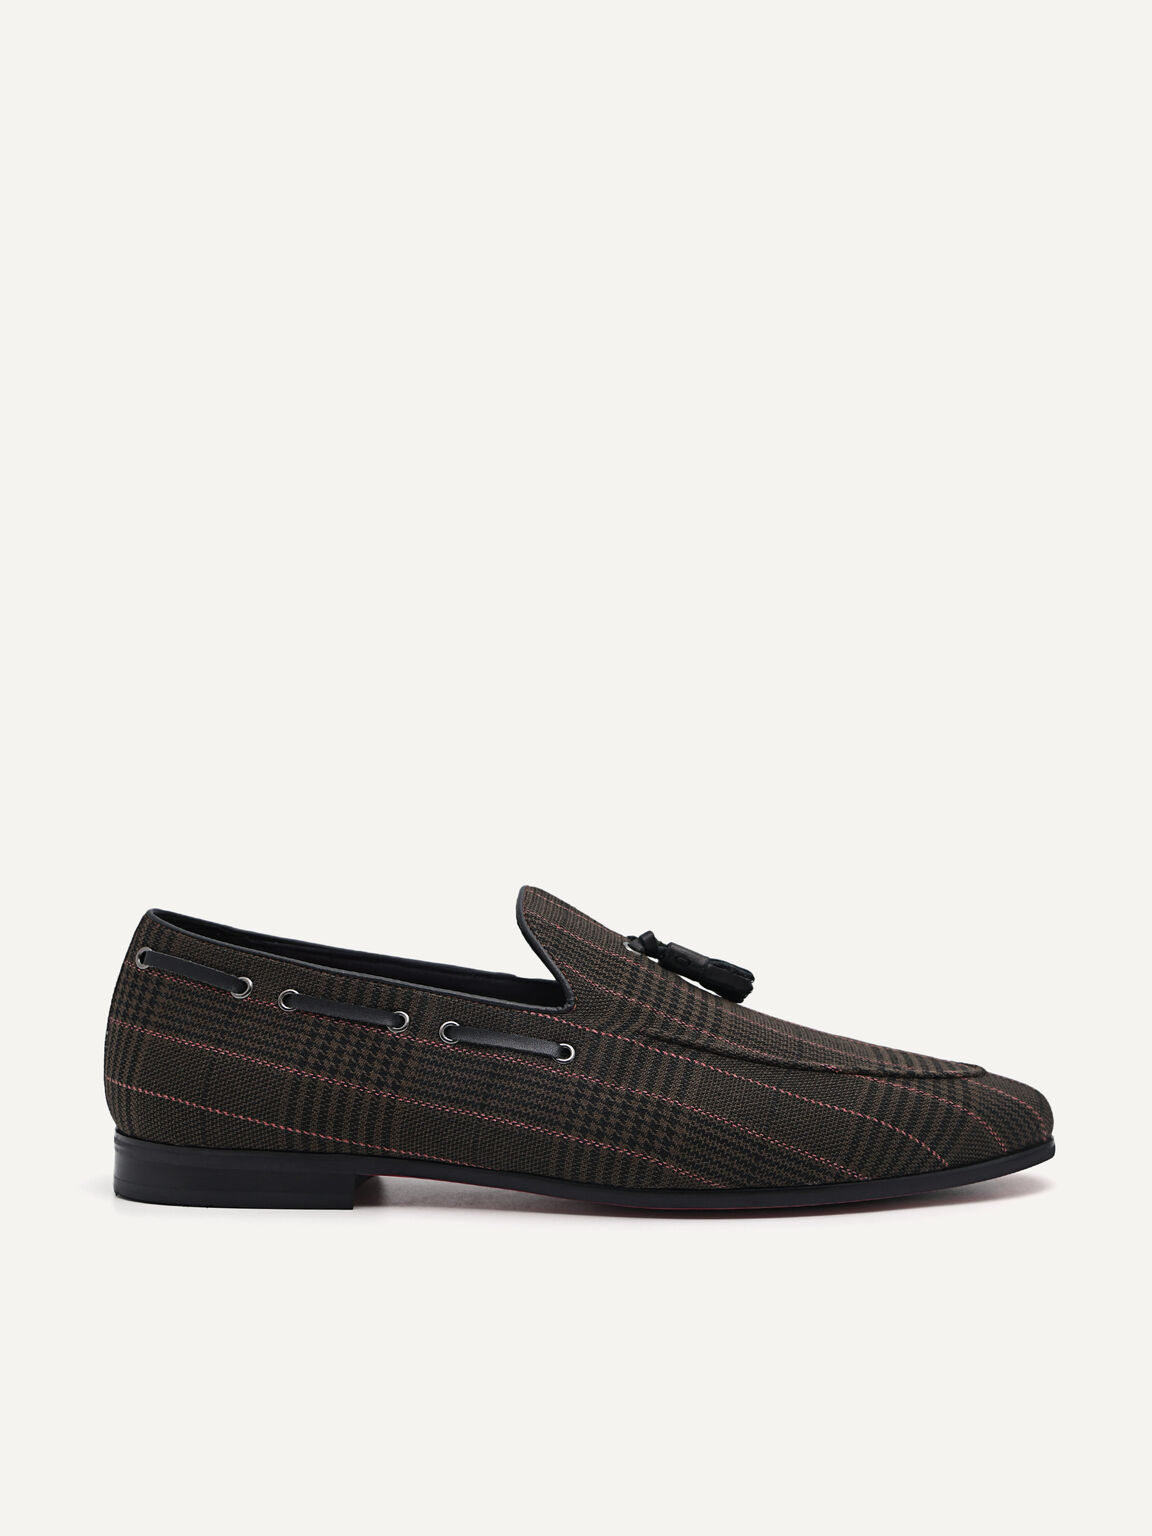 Checked Tasselled Loafers, Olive